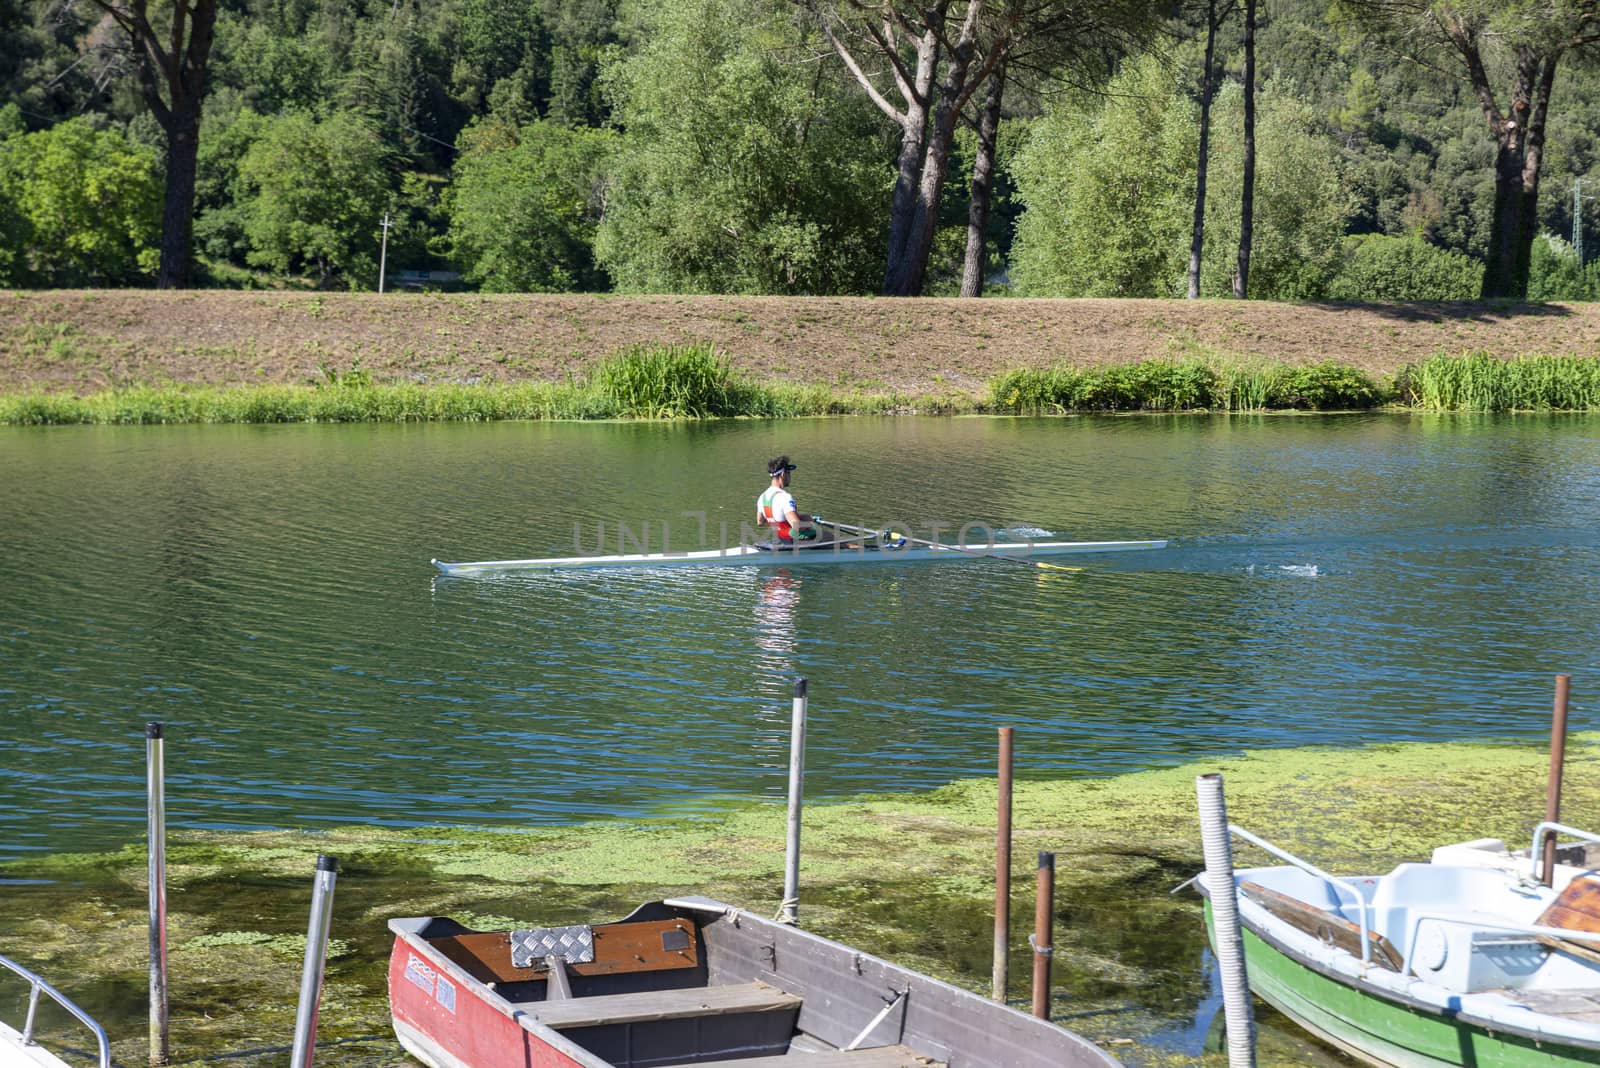 piediluco,italy june 22 2020:velino river which opens onto piediluco lake with rowing vests